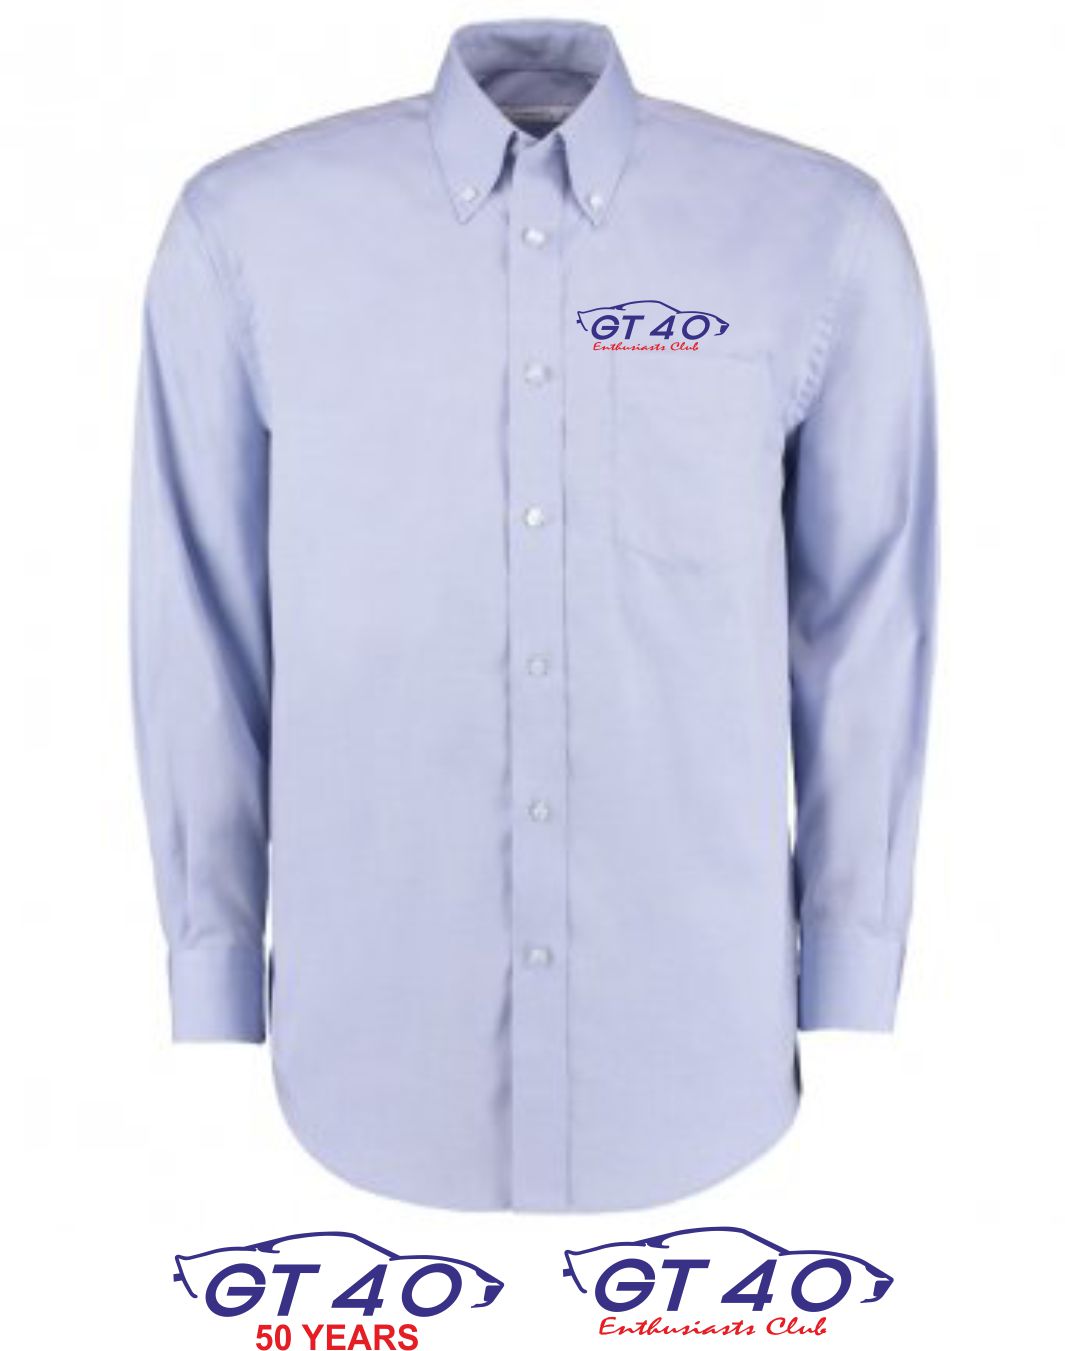 GT40 Enthusiasts Pit Shirt